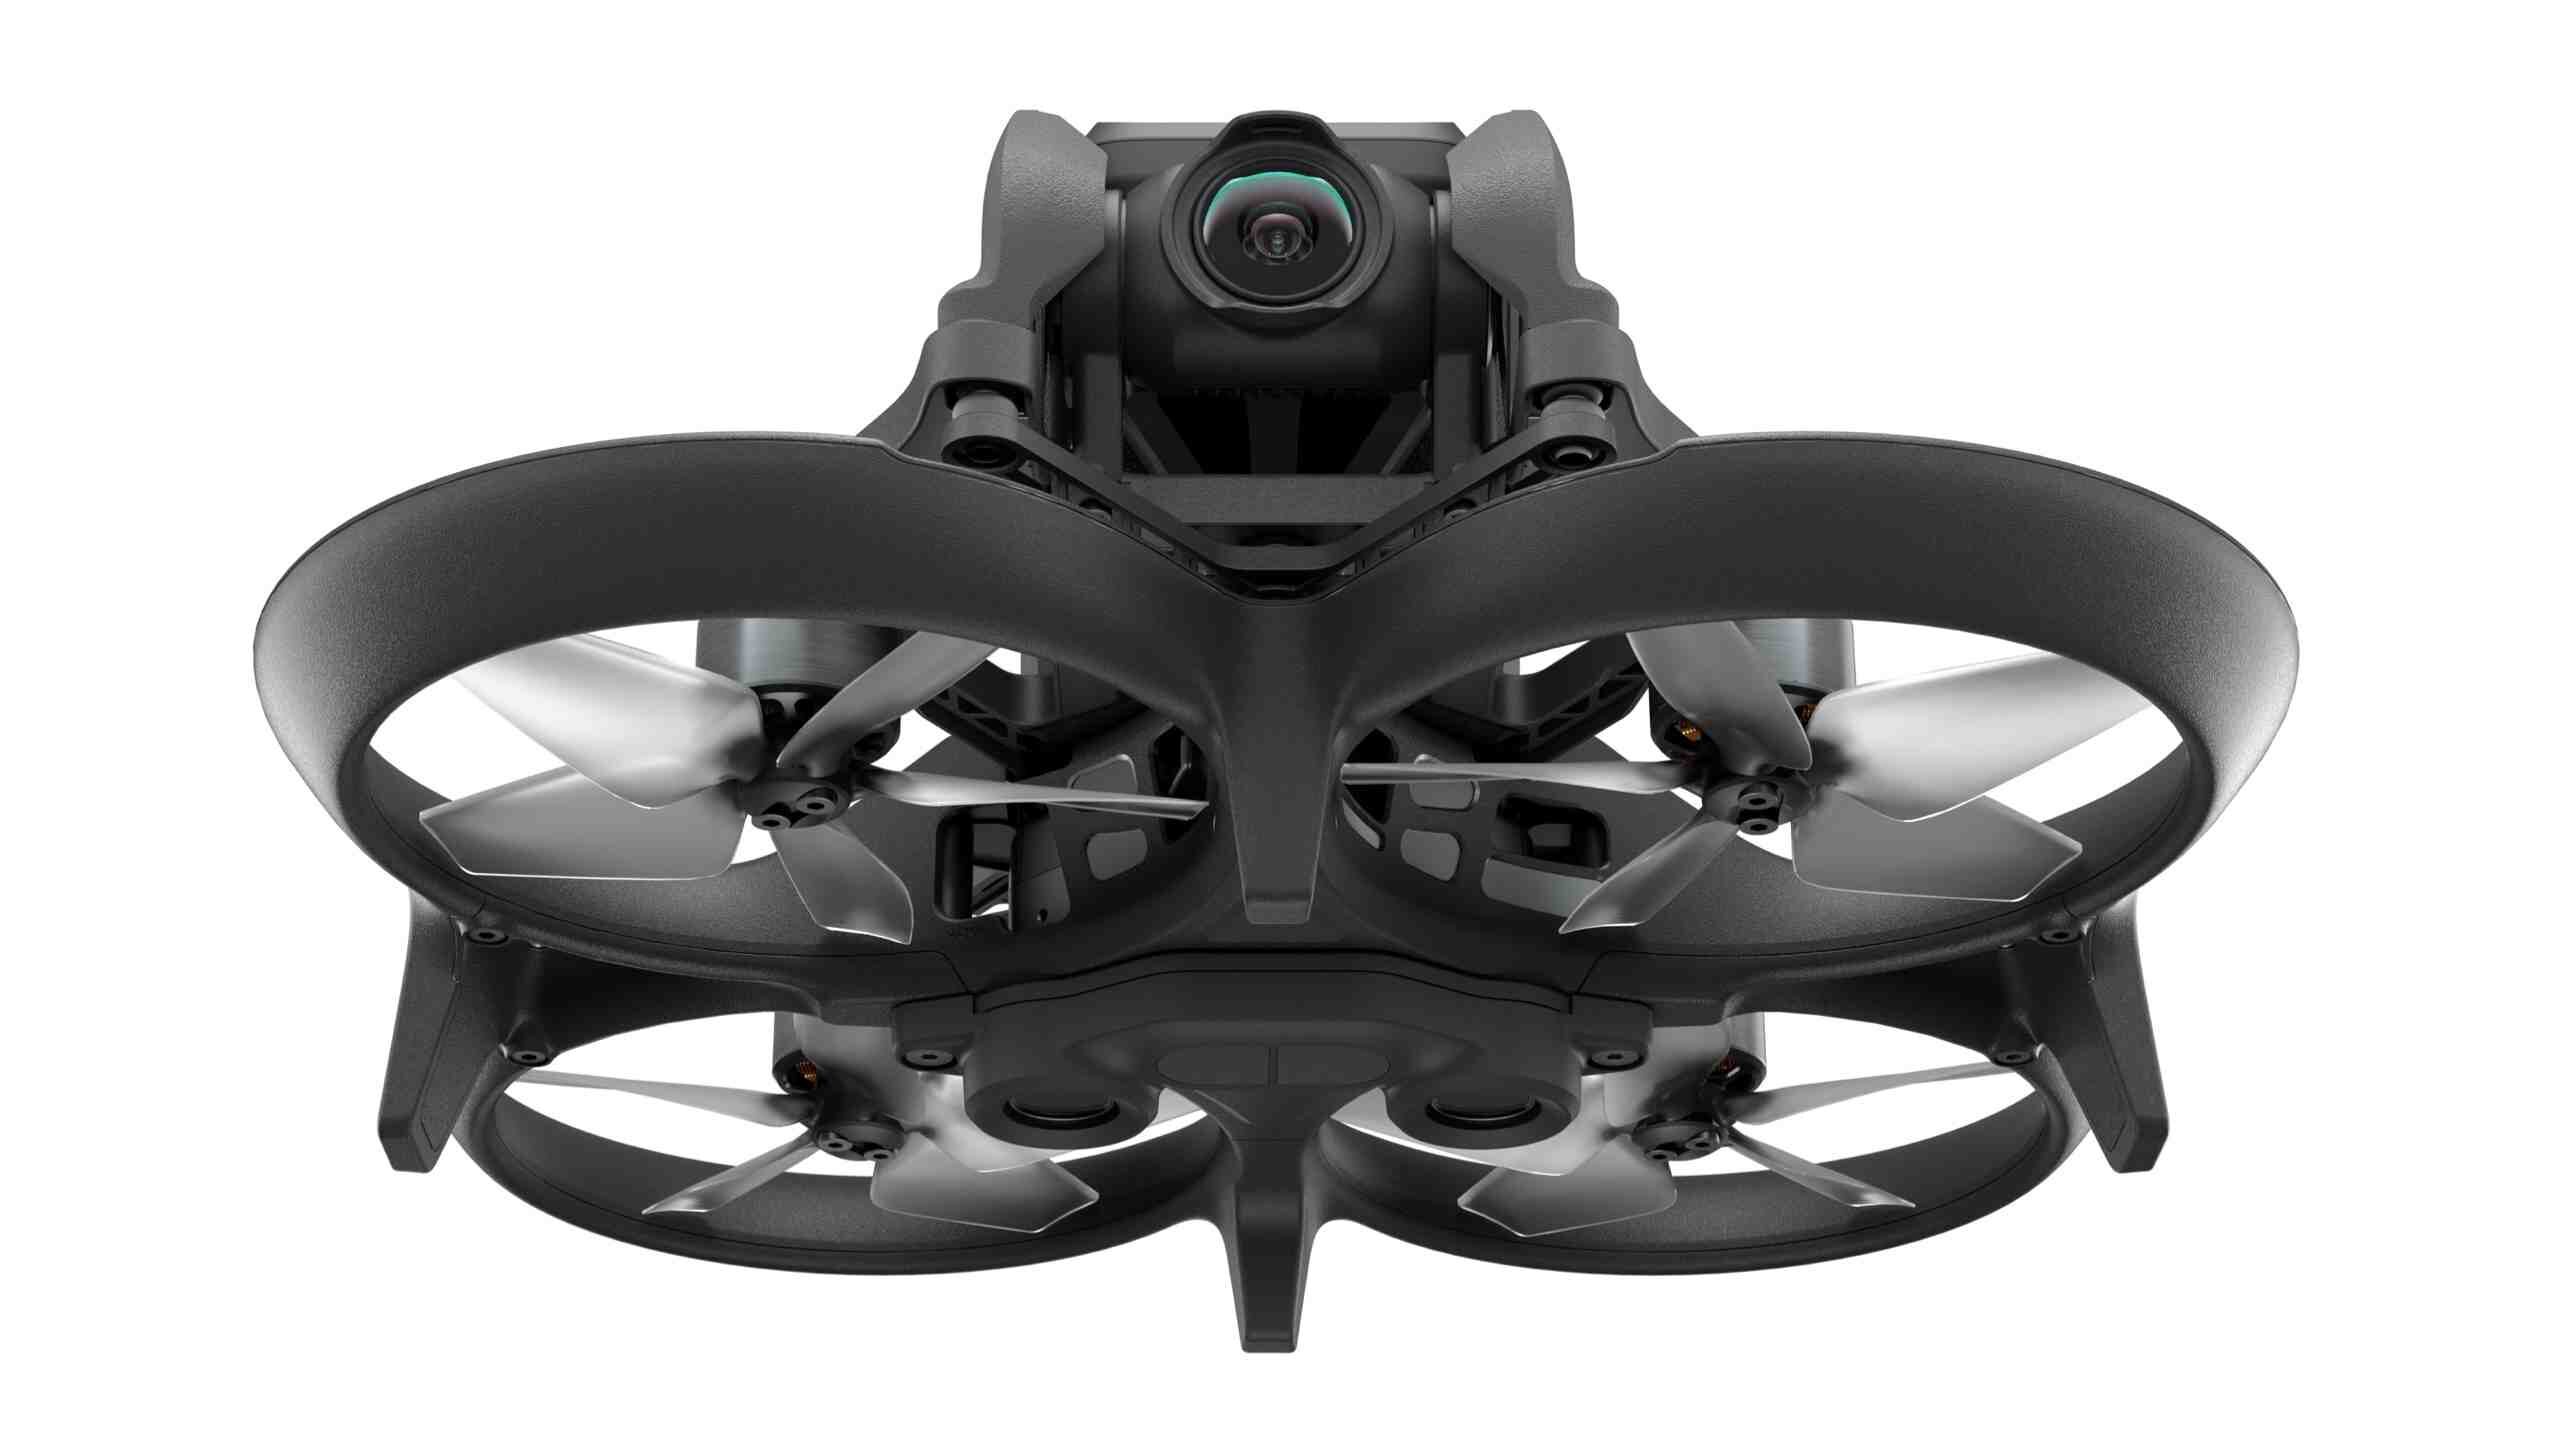 DJI Avata Safety Features